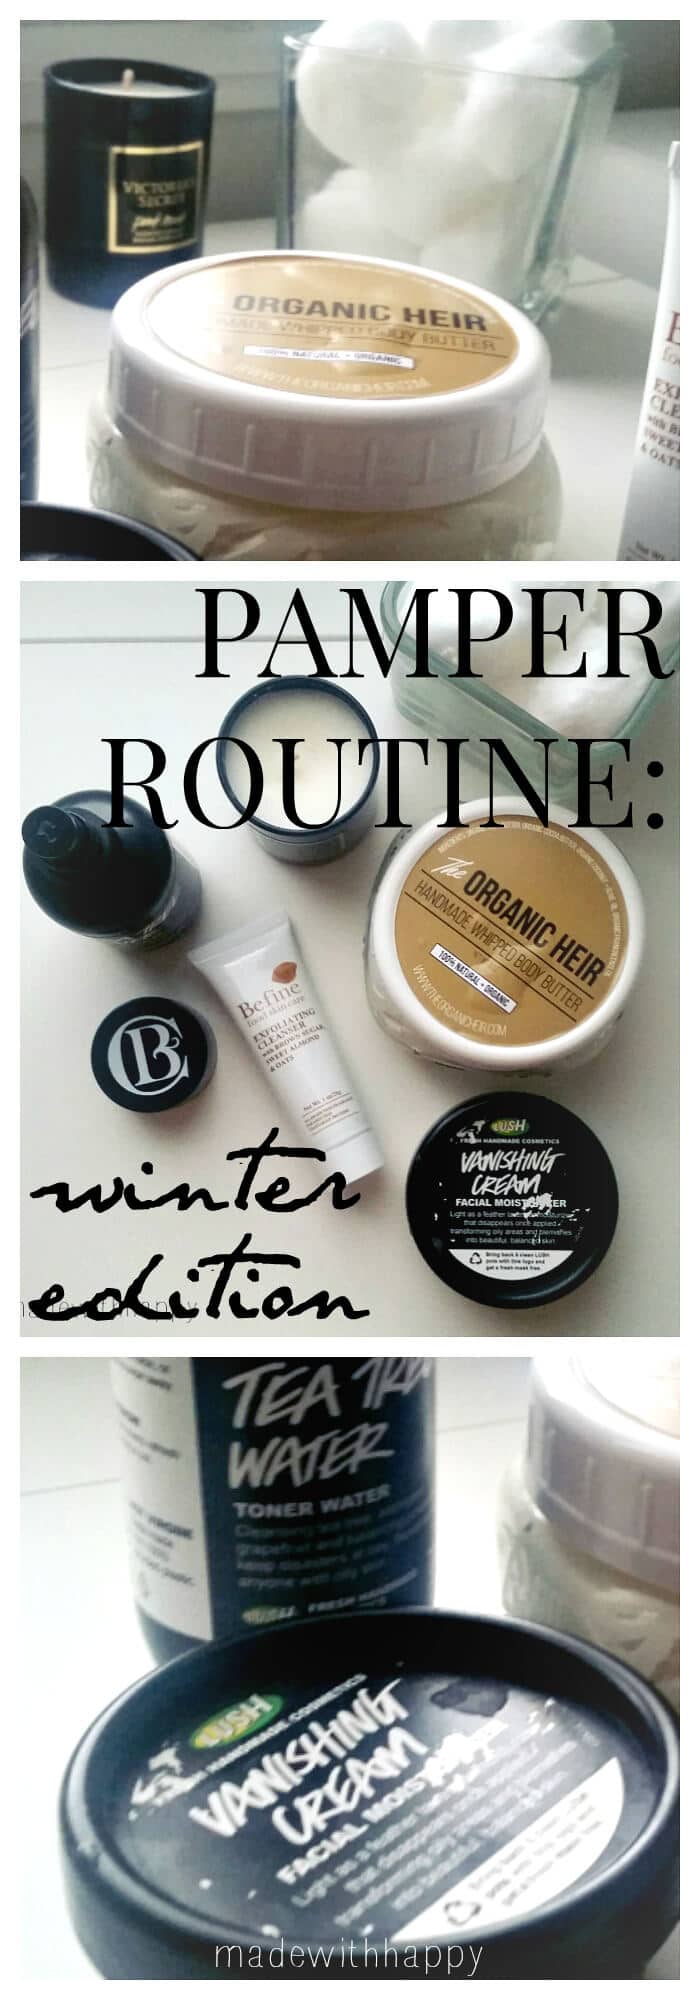 Pamper Routine in Winter | Winter Skin Care Tips | www.madewithHAPPY.com